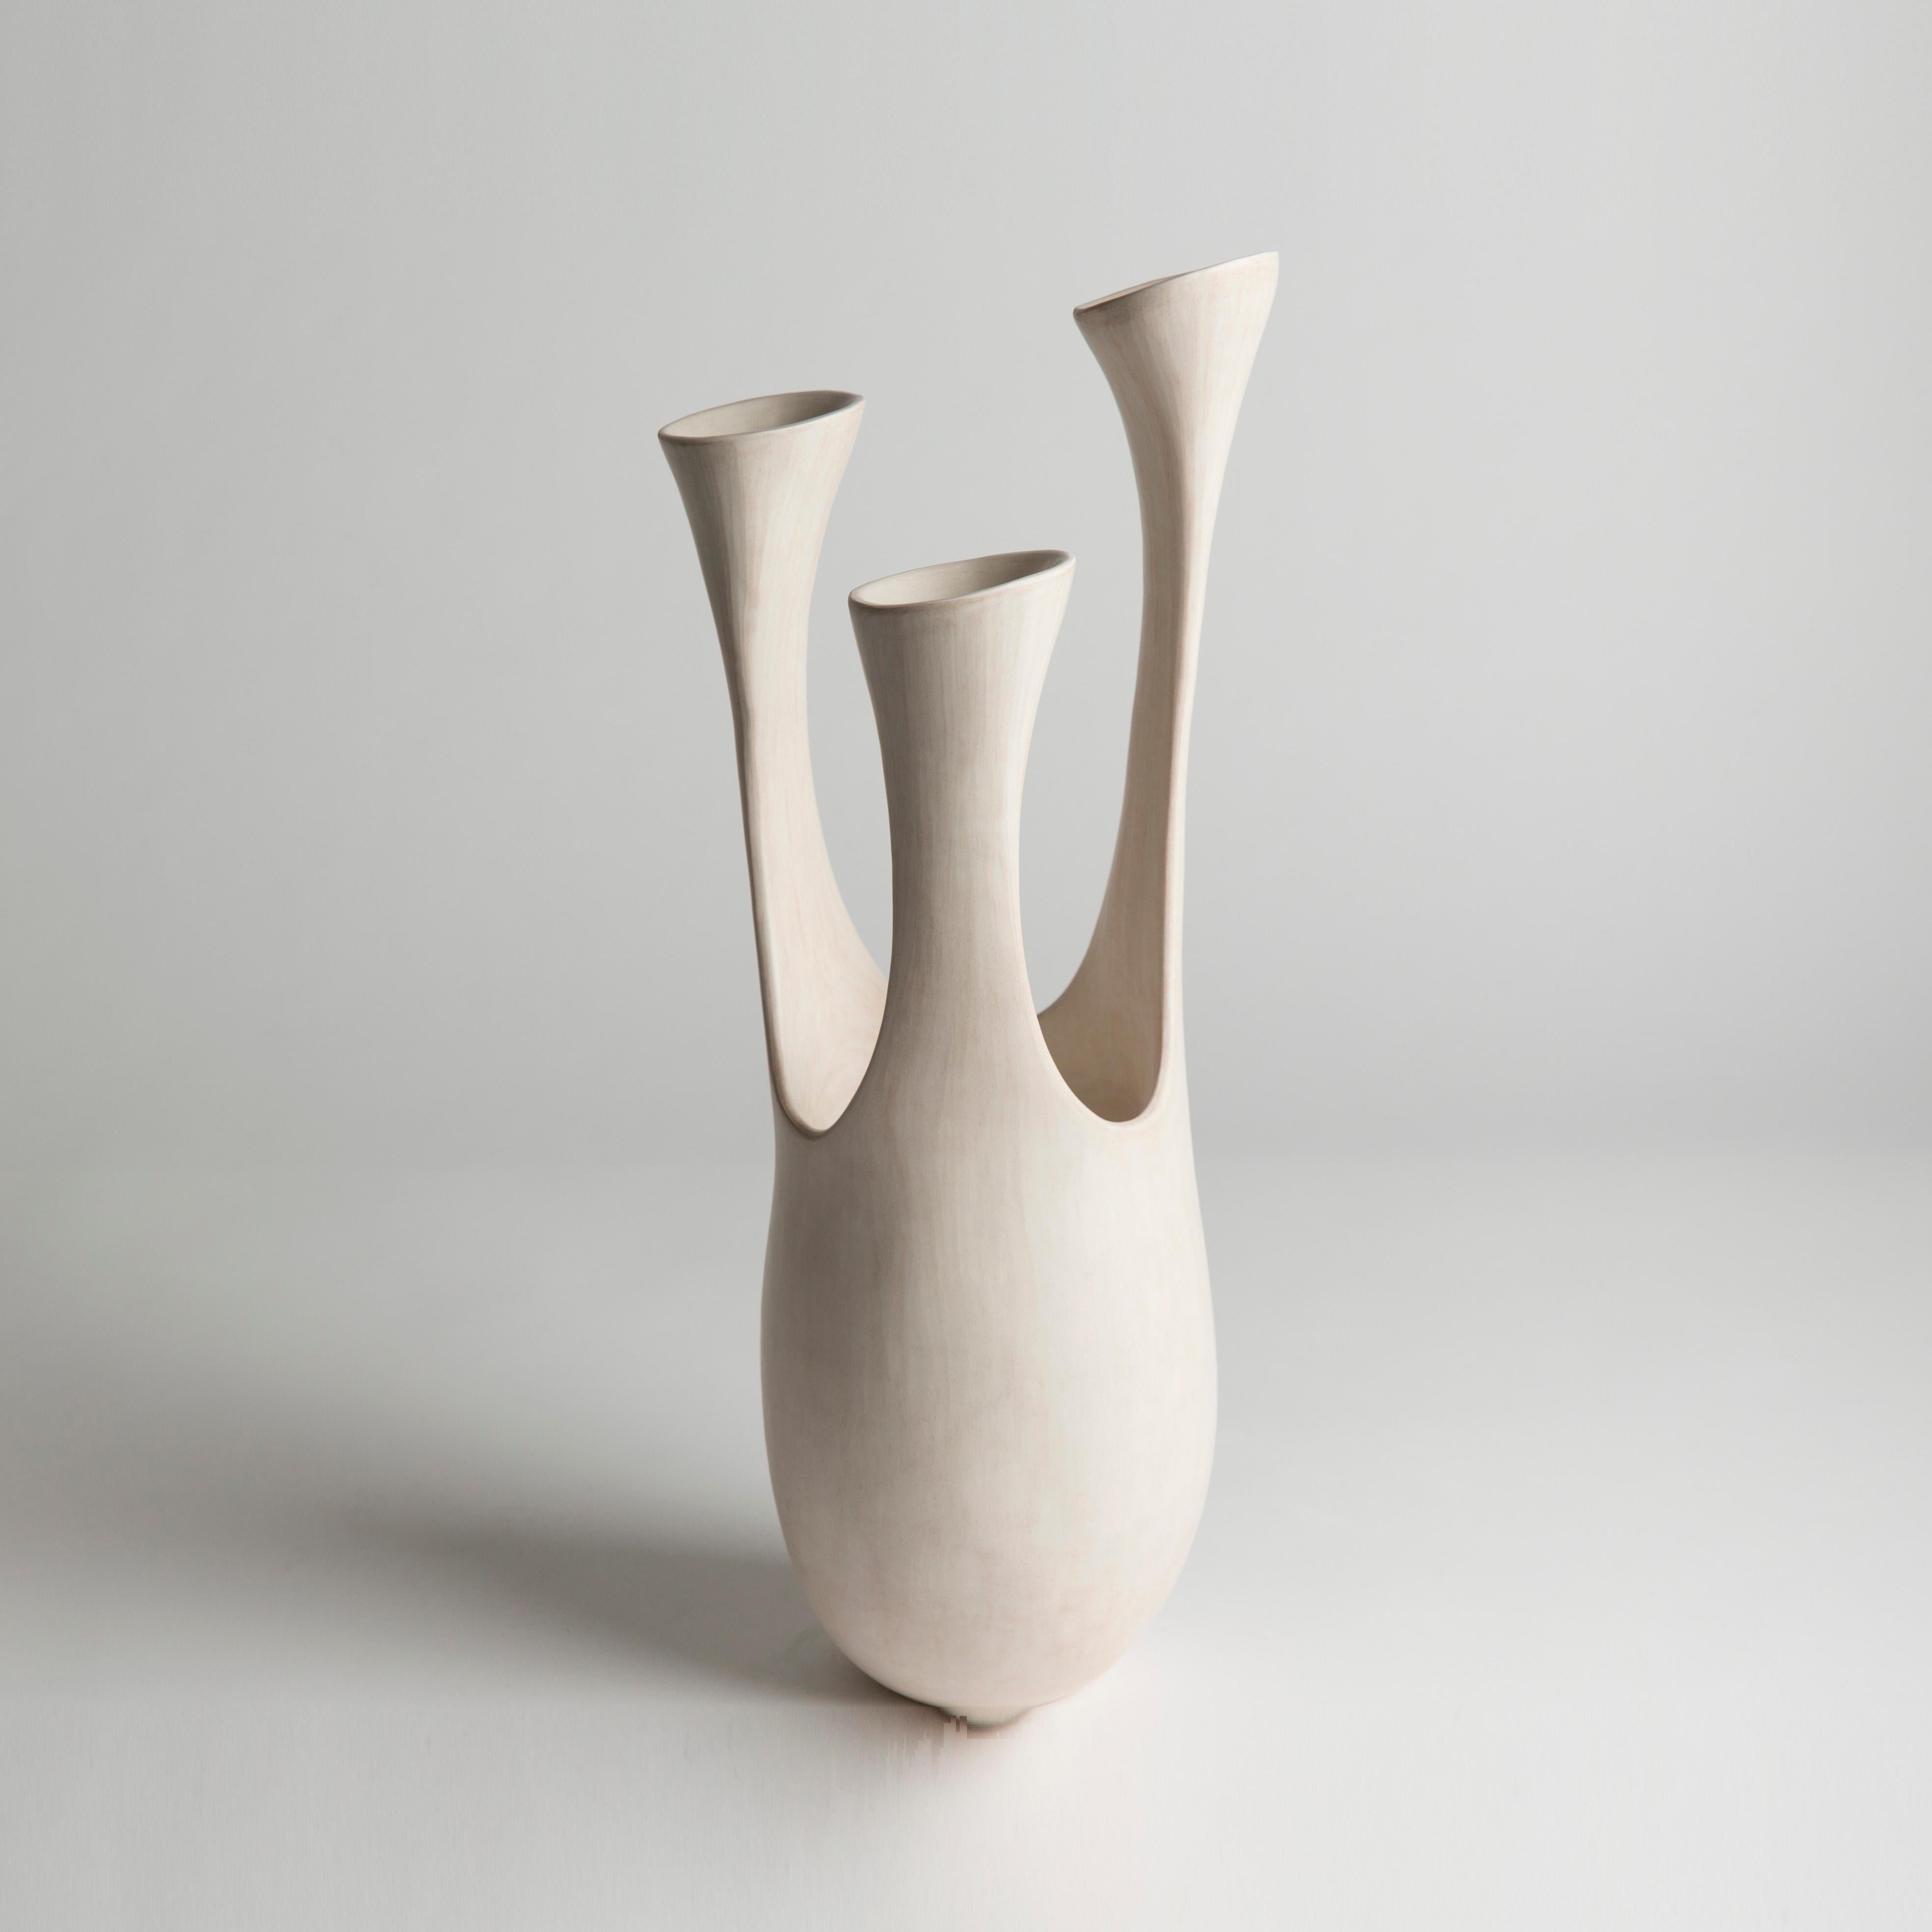 Trio, 2021 (Ceramic, C. 16.5 in. h x 6 in. w, Object No.: 3936)

Tina Vlassopulos was born in London in 1954. After graduating from Bristol Polytechnic in 1977, she returned to London to set up her studio.

Although the work seems to draw ideas from